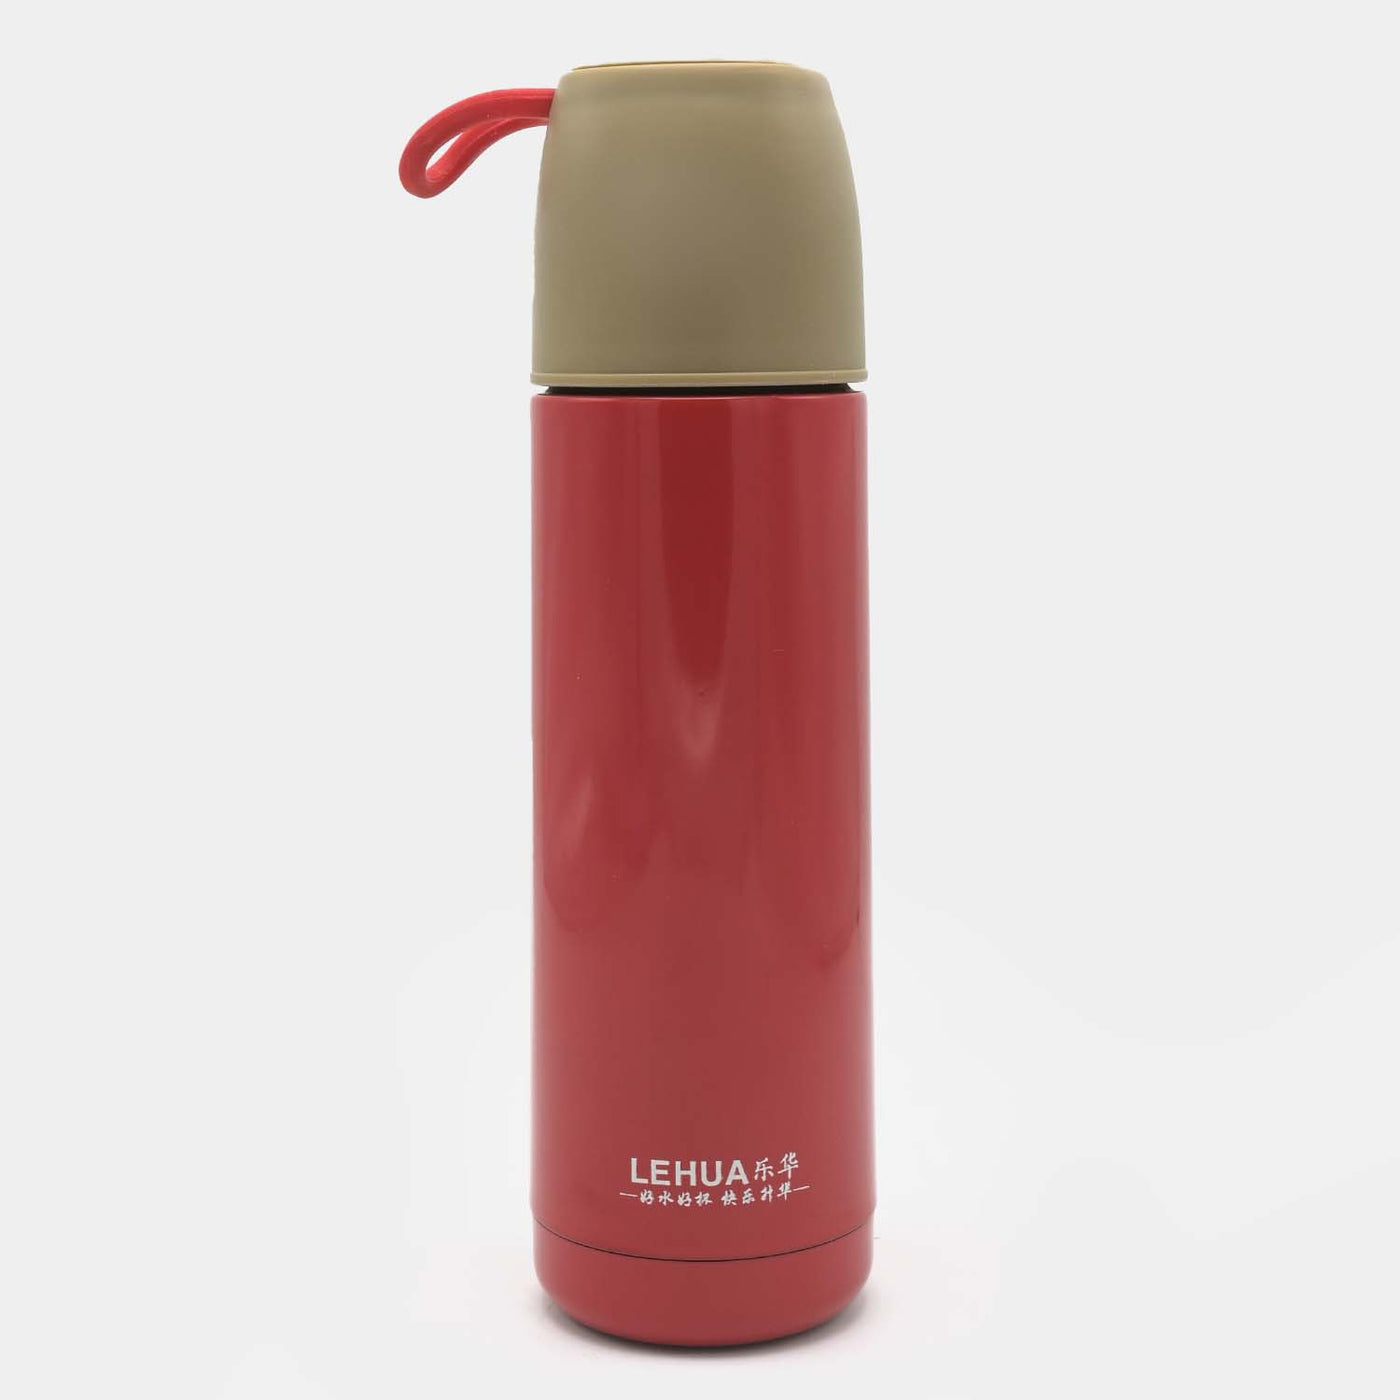 Stainless Steel Water Bottle Flask 500ml - Red